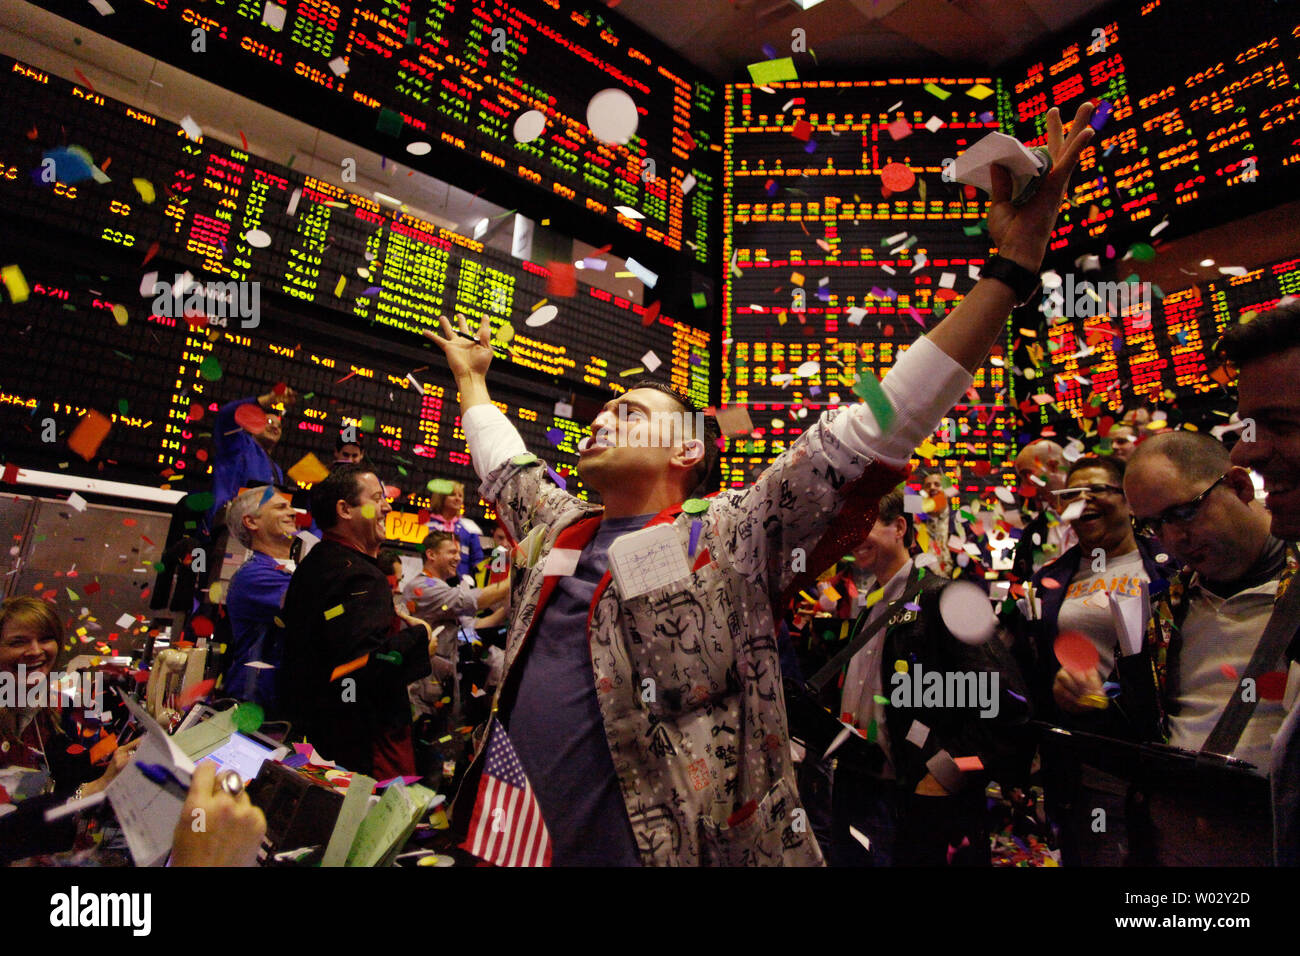 Jason Kelly, a trader in the Wheat Options pit at the CME Group throws up his arms as traders toss confetti at the closing bell for the year on December 31, 2009 in Chicago.     UPI/Brian Kersey Stock Photo